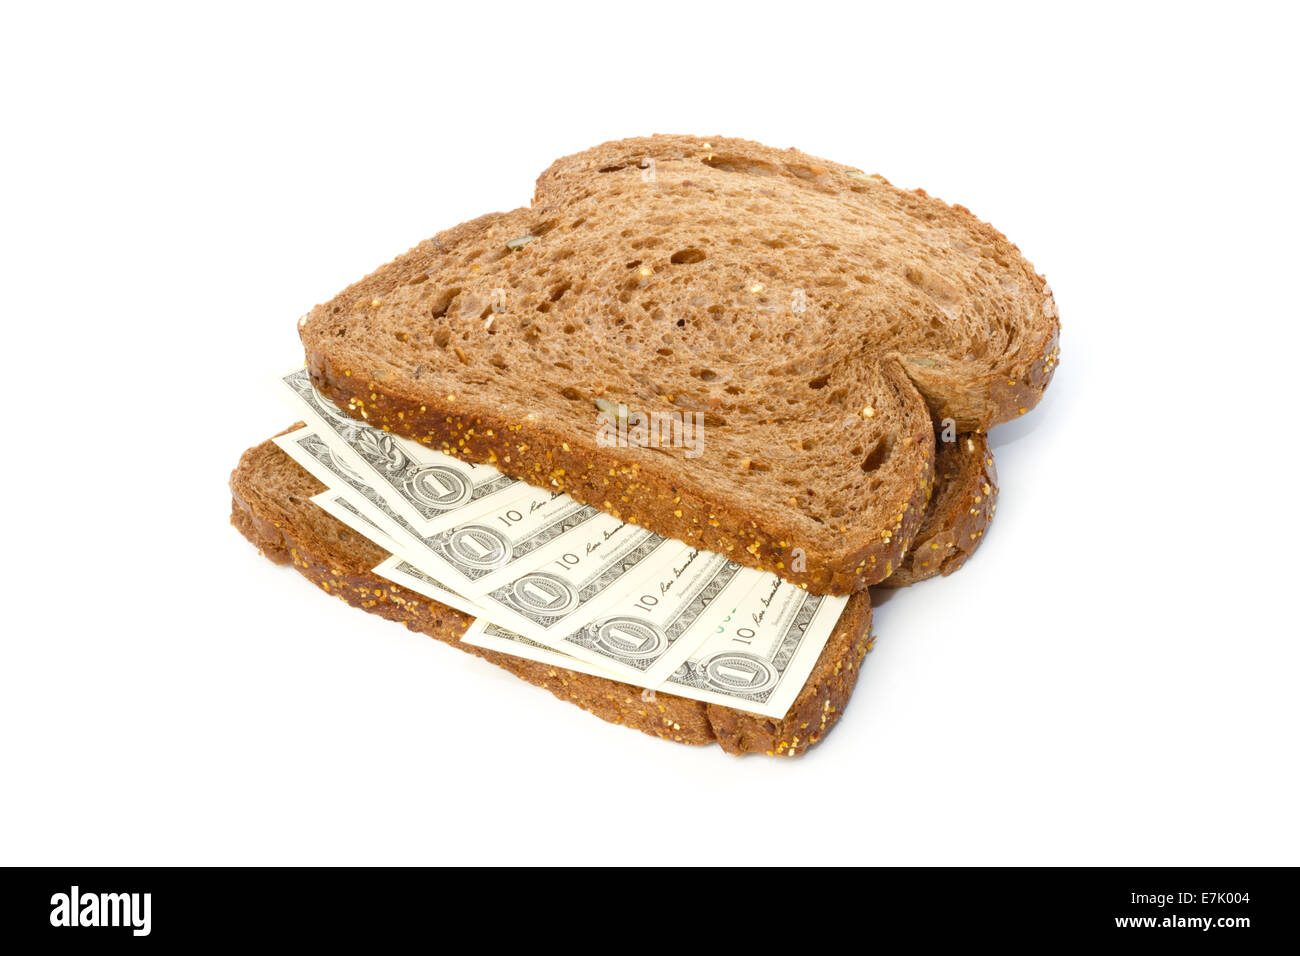 Two slices of brown bread with US dollar bills sandwich spread Stock Photo